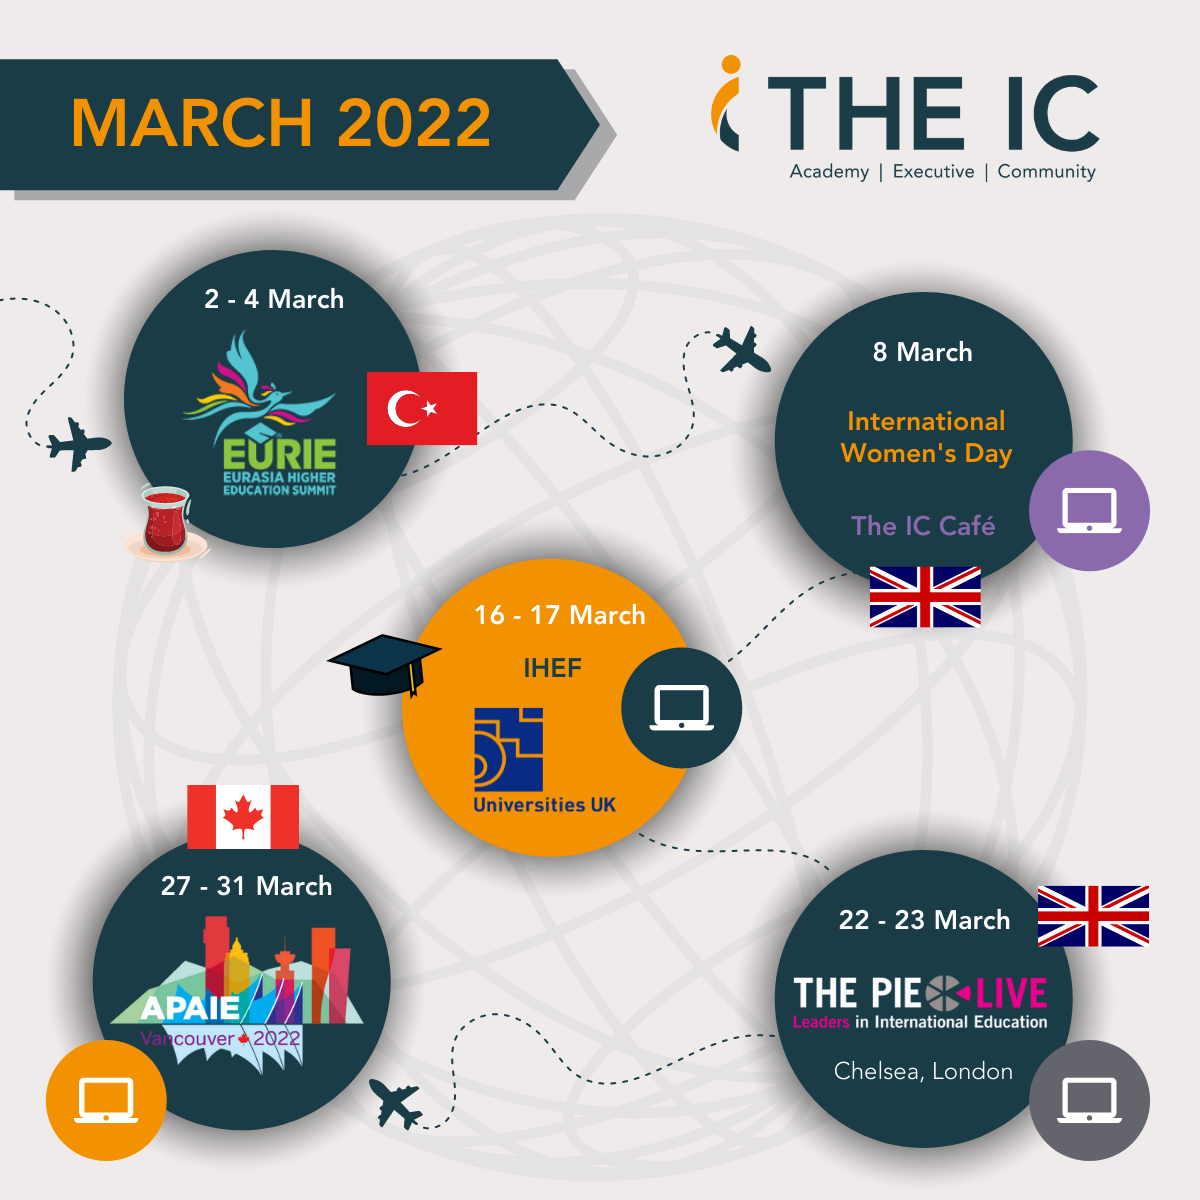 The IC Global around the world in 30 days